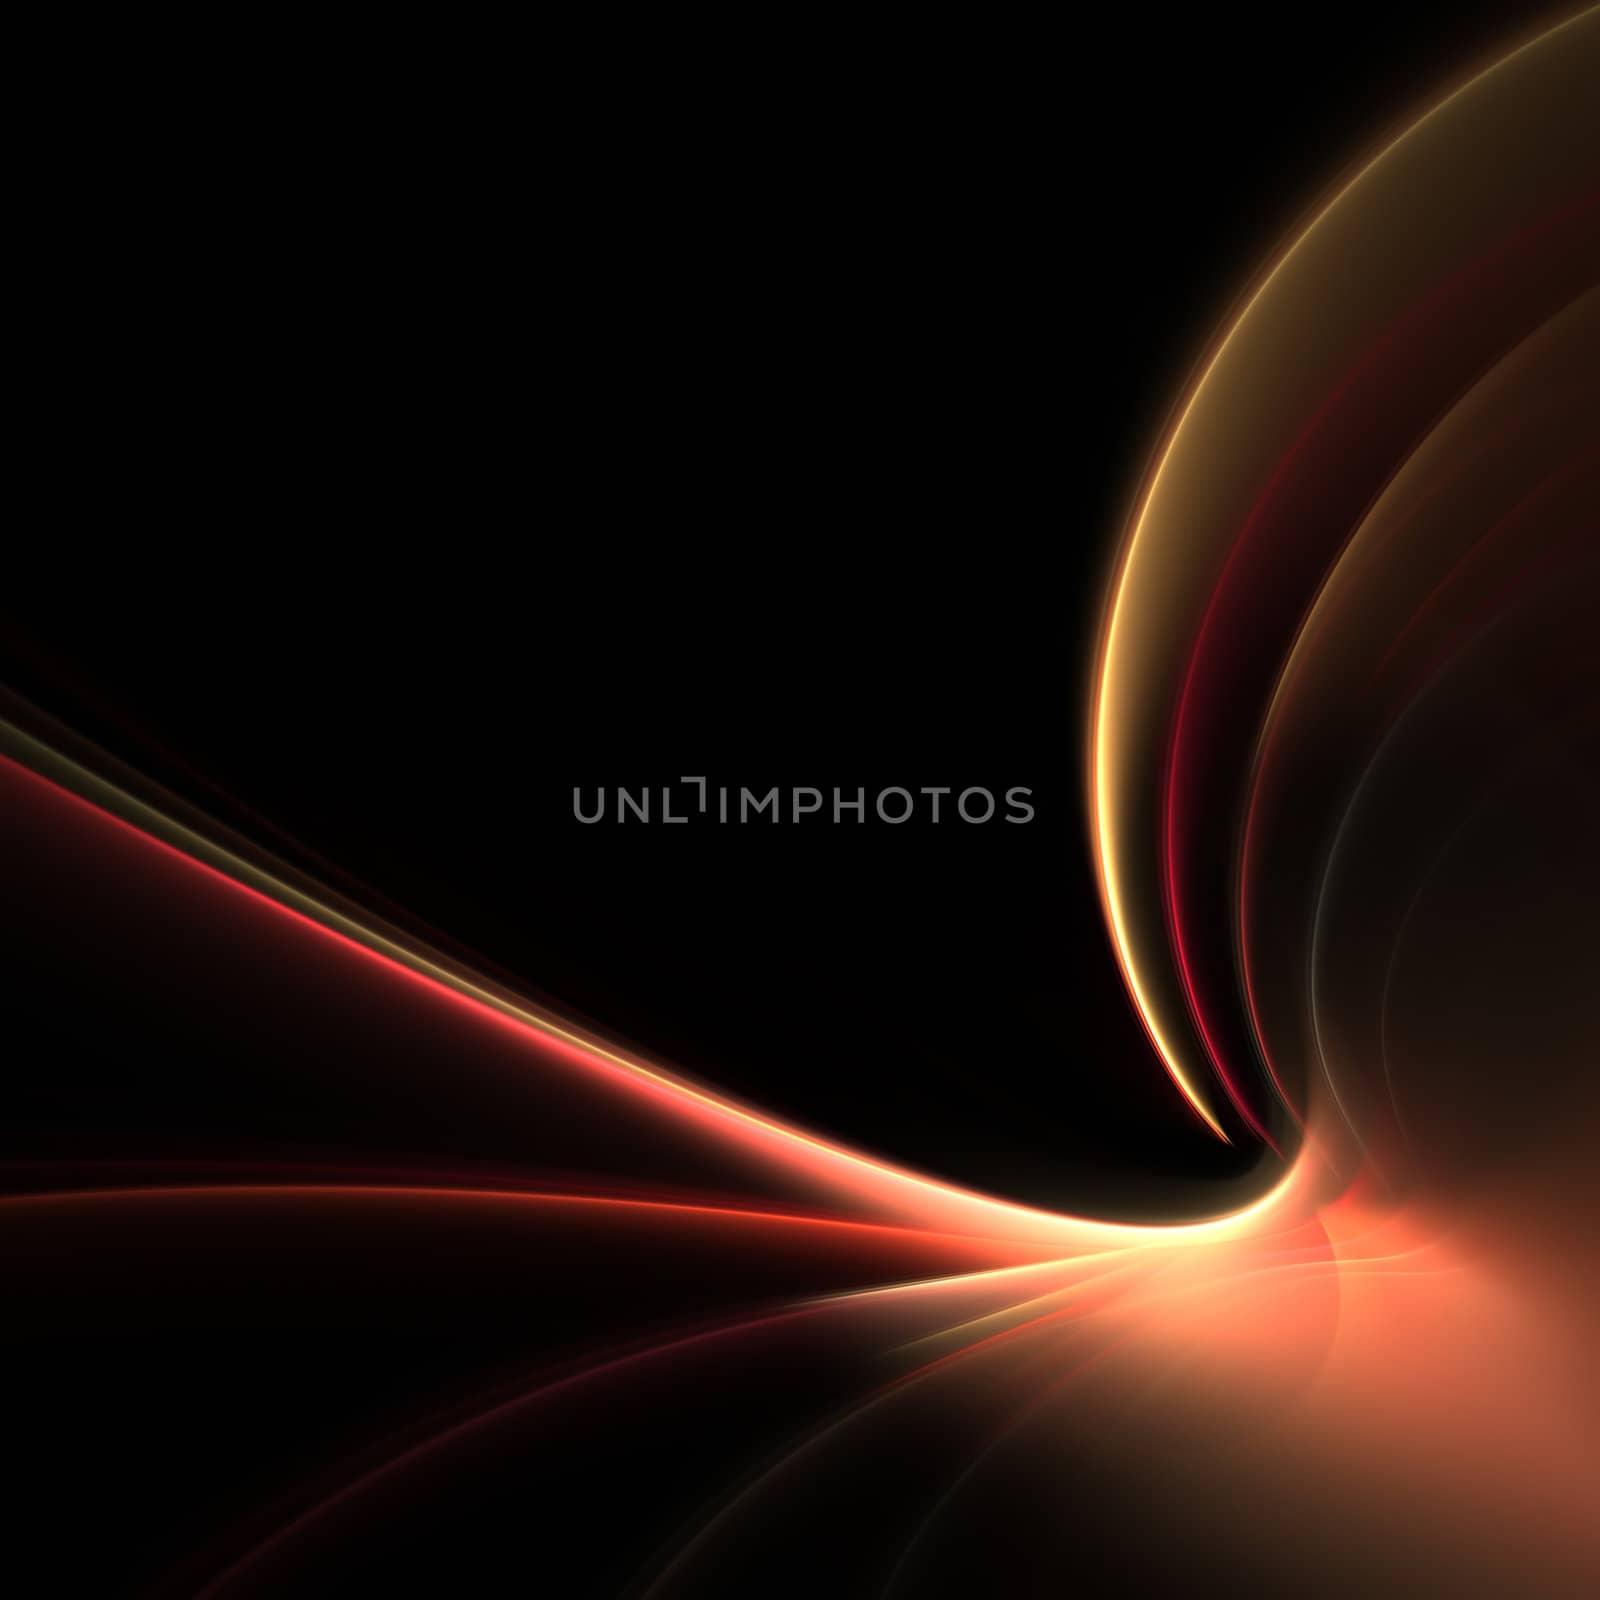 Fractal abstract design with glowing light streaks in warm tones.